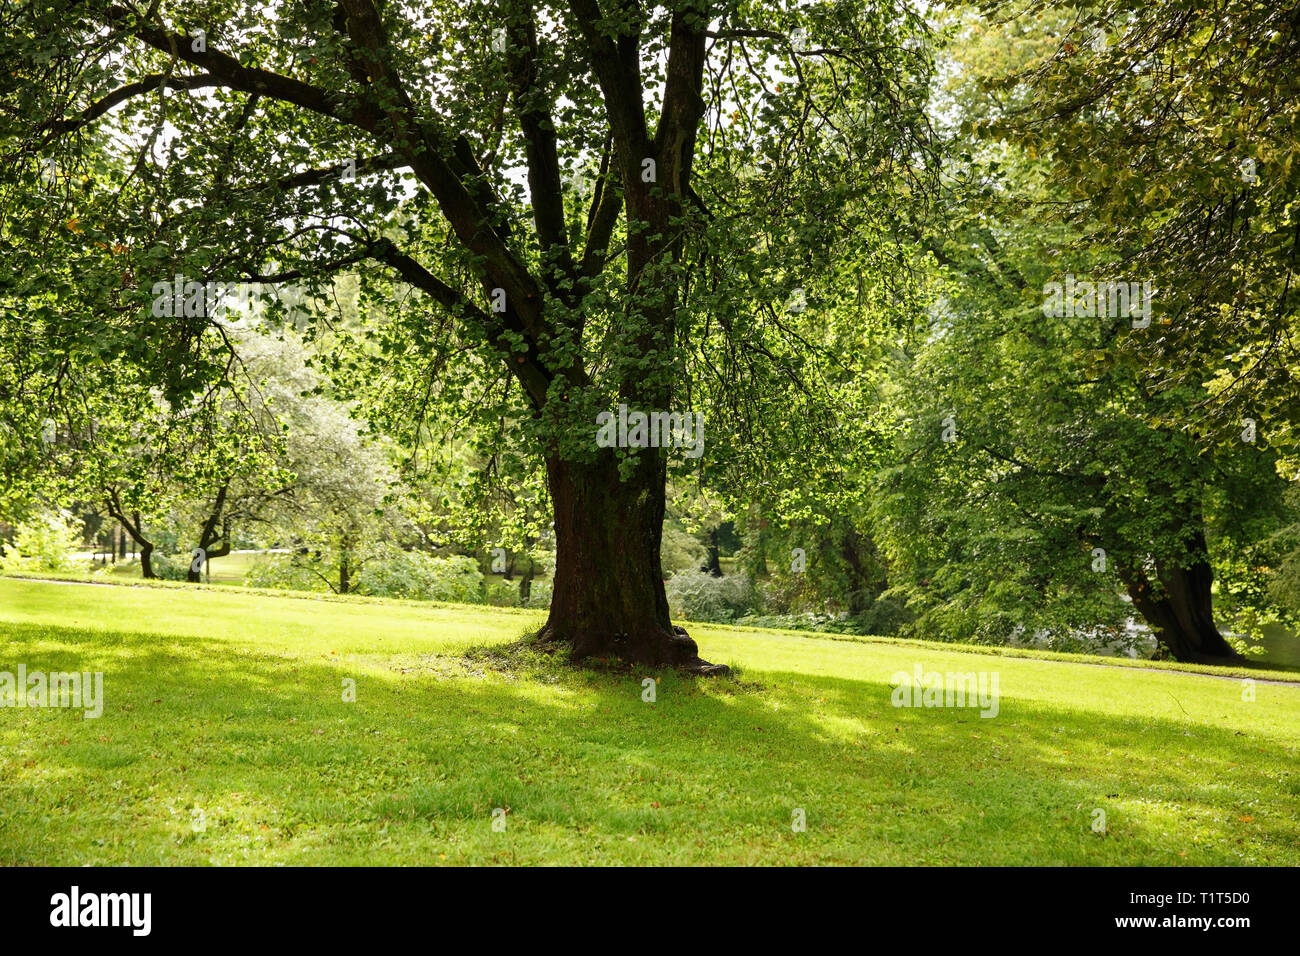 The Royal Palace park in Oslo, Norway Stock Photo - Alamy